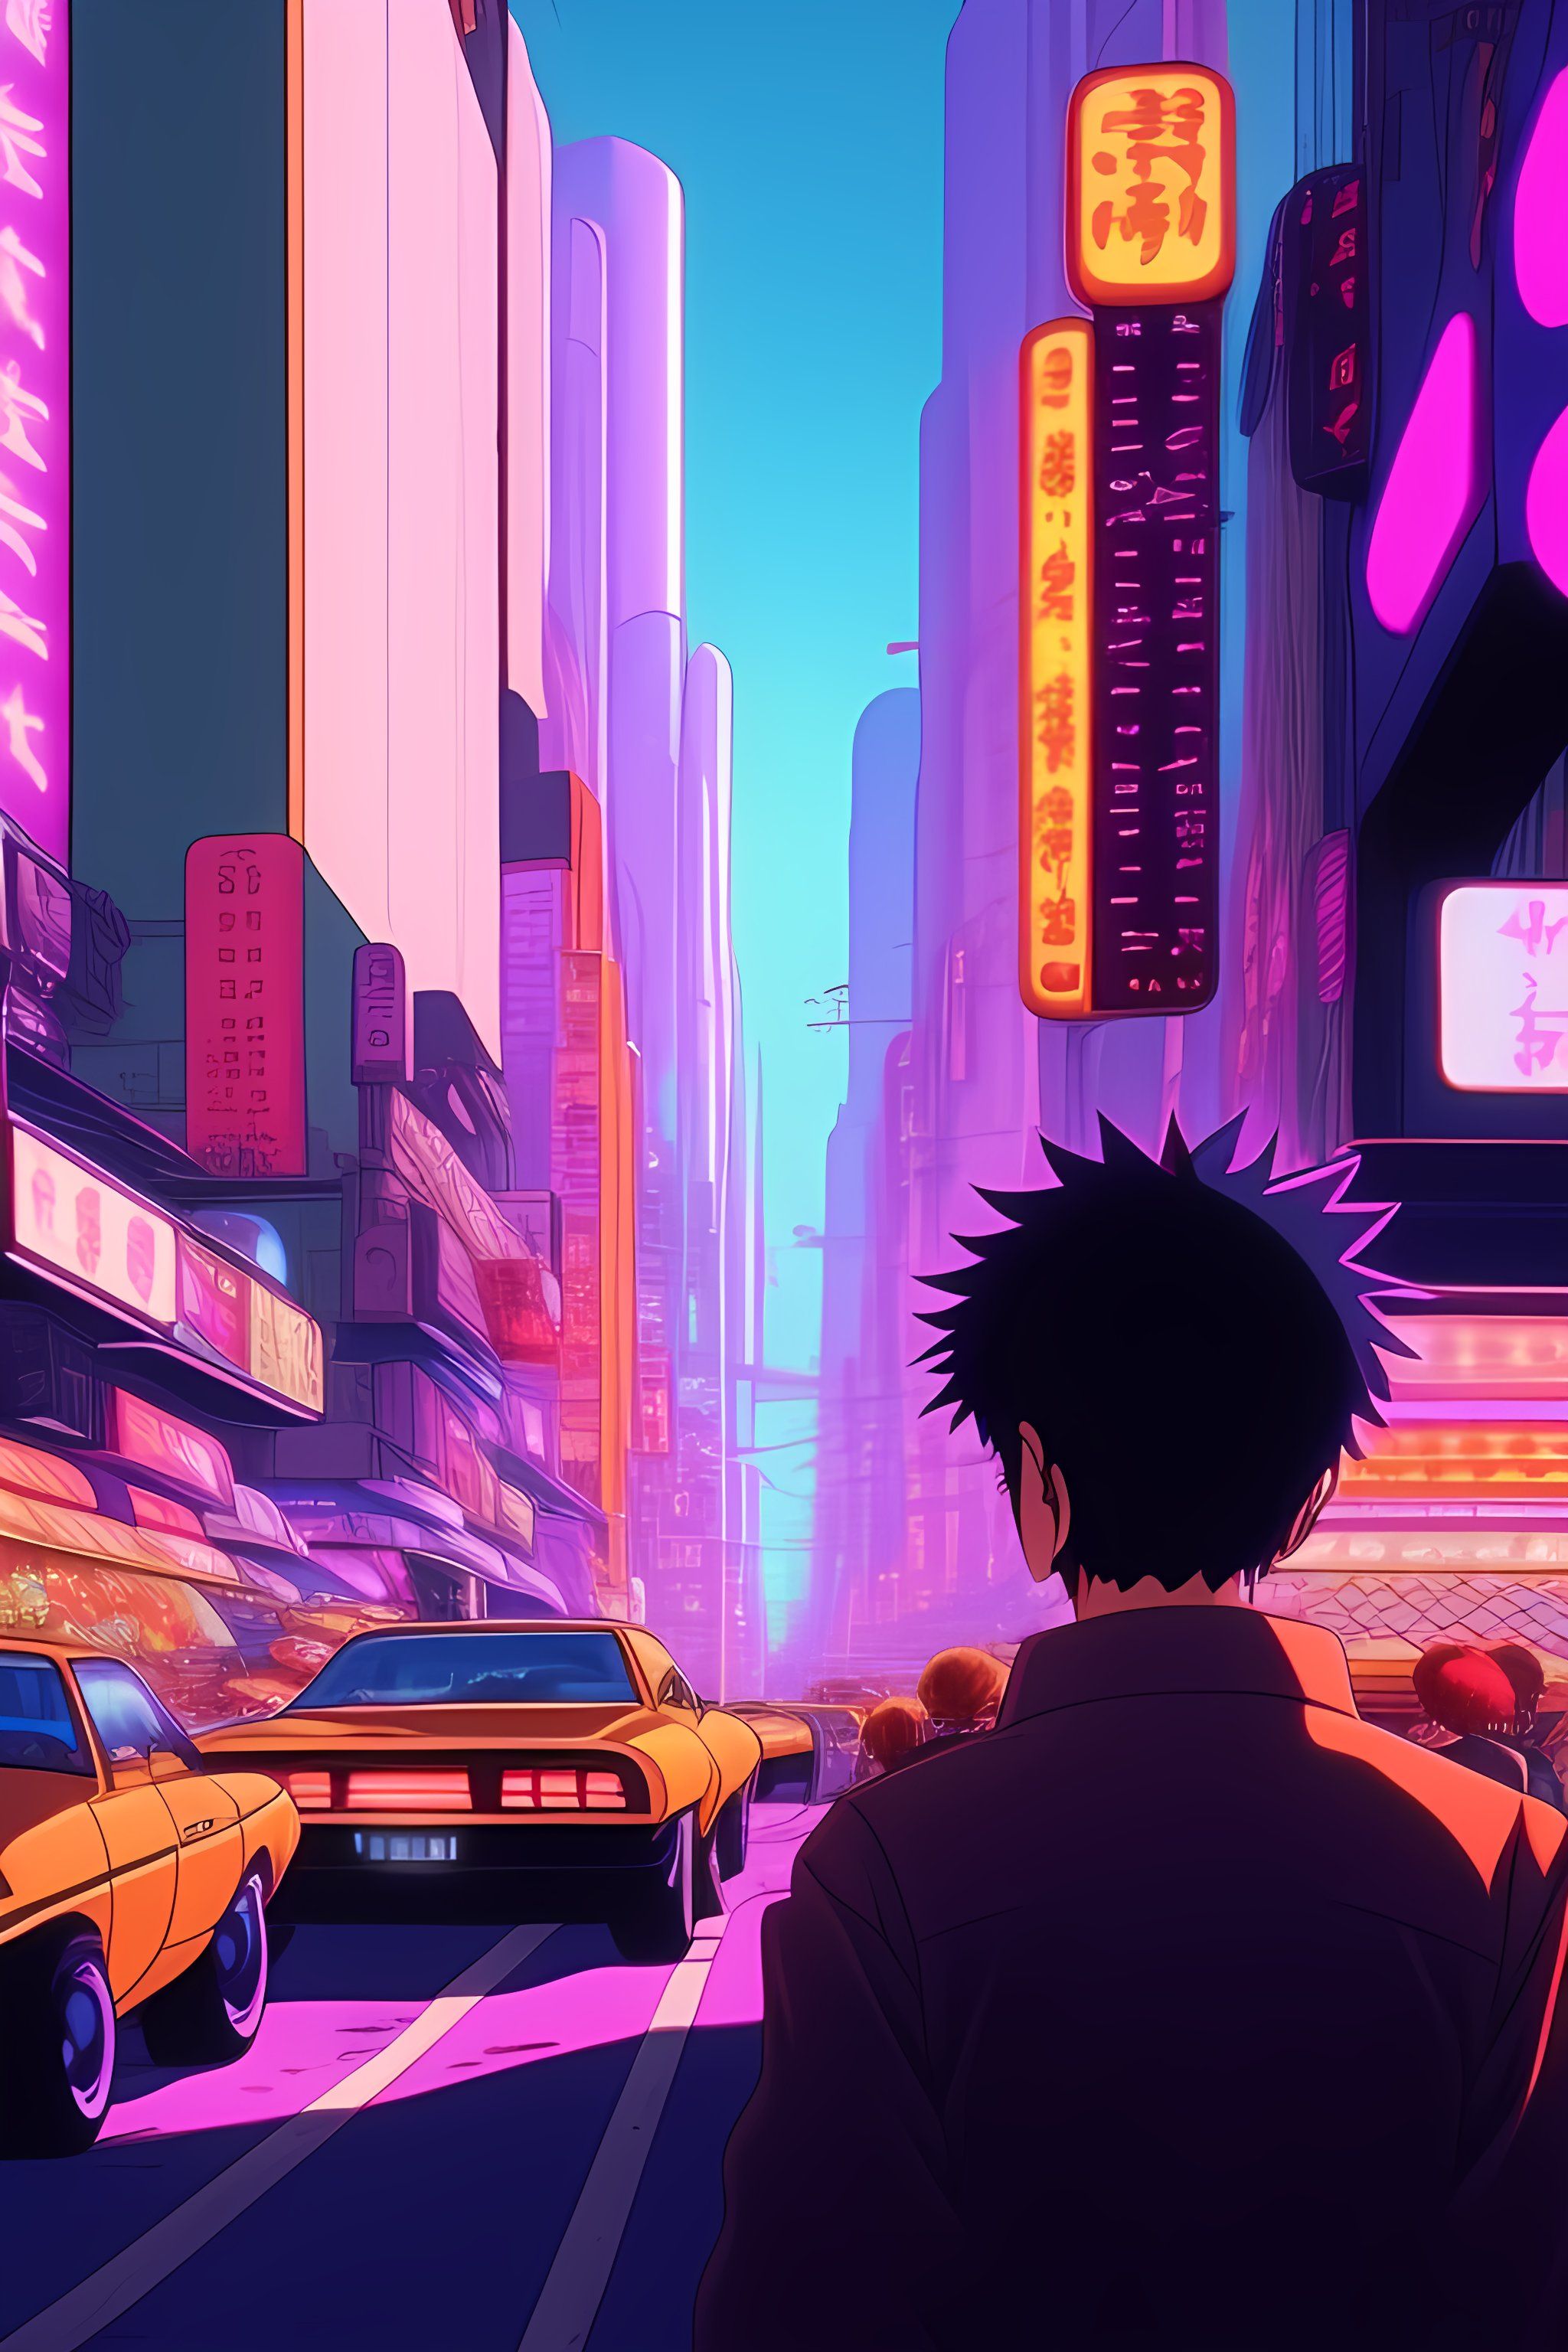 Lexica anime screenshot from Akira, 90's anime aesthetic. Incredibly detailed cinematic shot. Neo tokyo. Crowded city. Neon lights